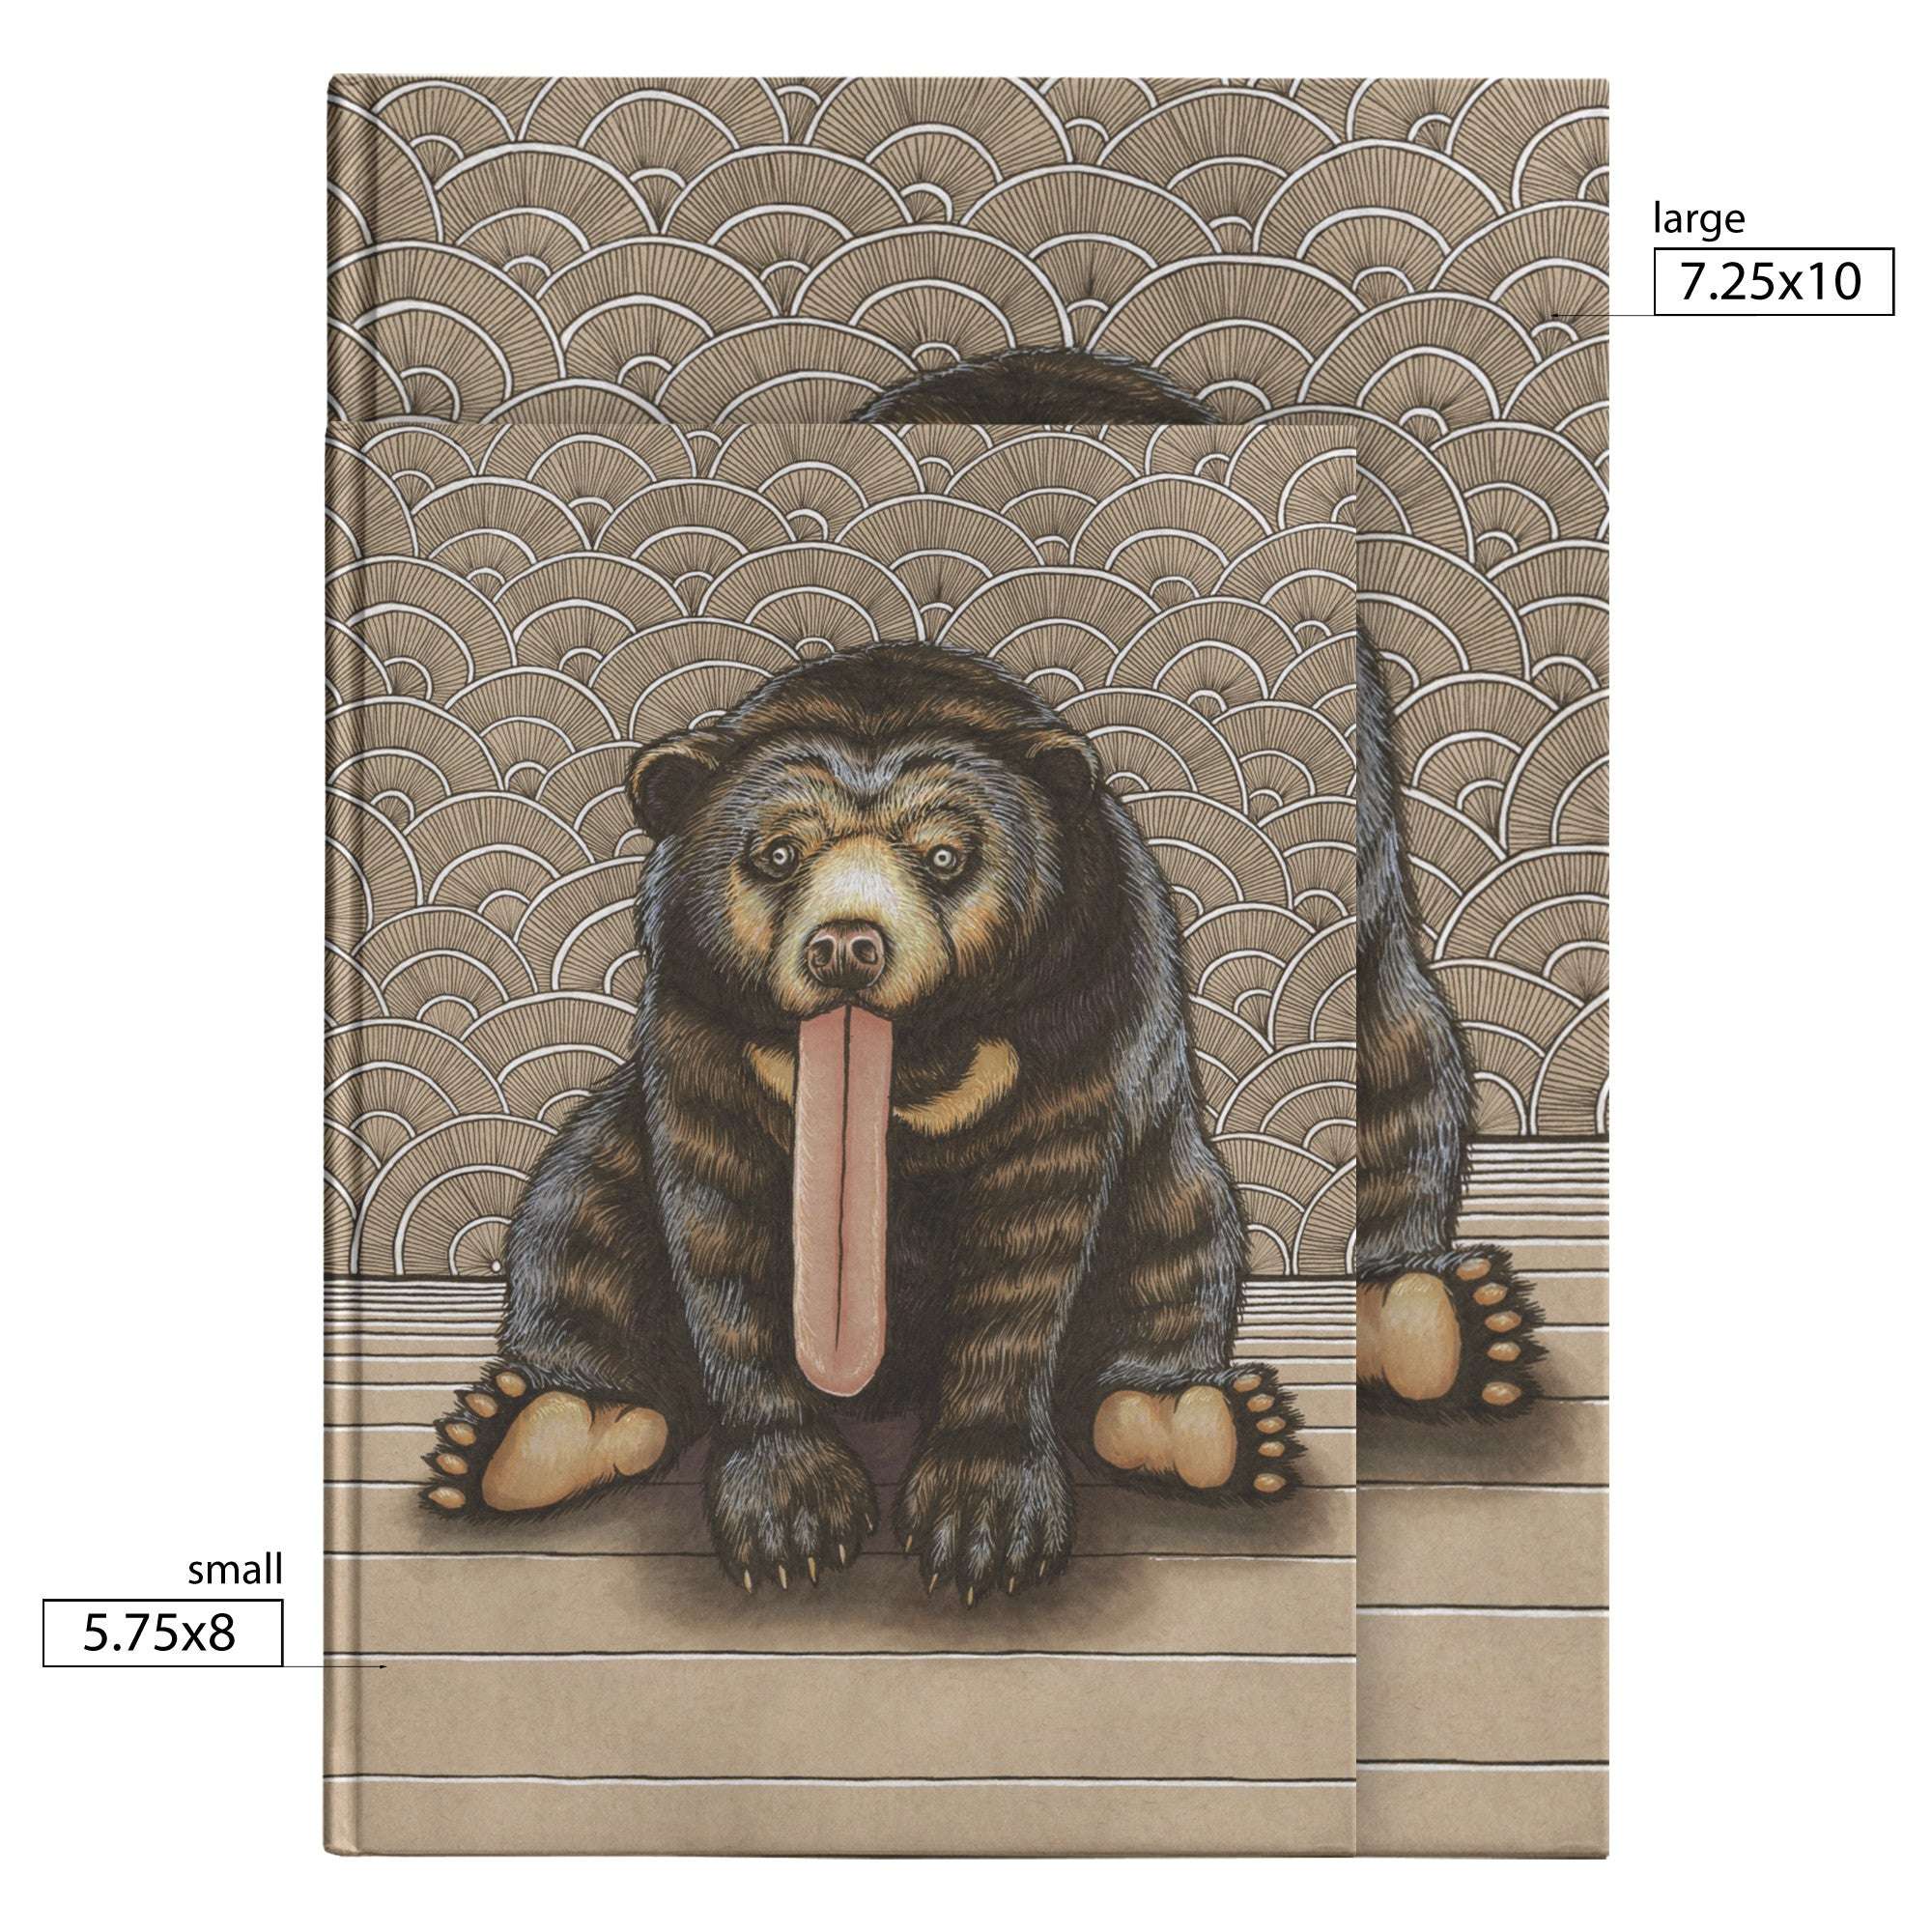 Illustration of a yawning bear with a long tongue, sitting on its hind legs against a patterned backdrop, displayed in two Sun Bear Journal sizes.